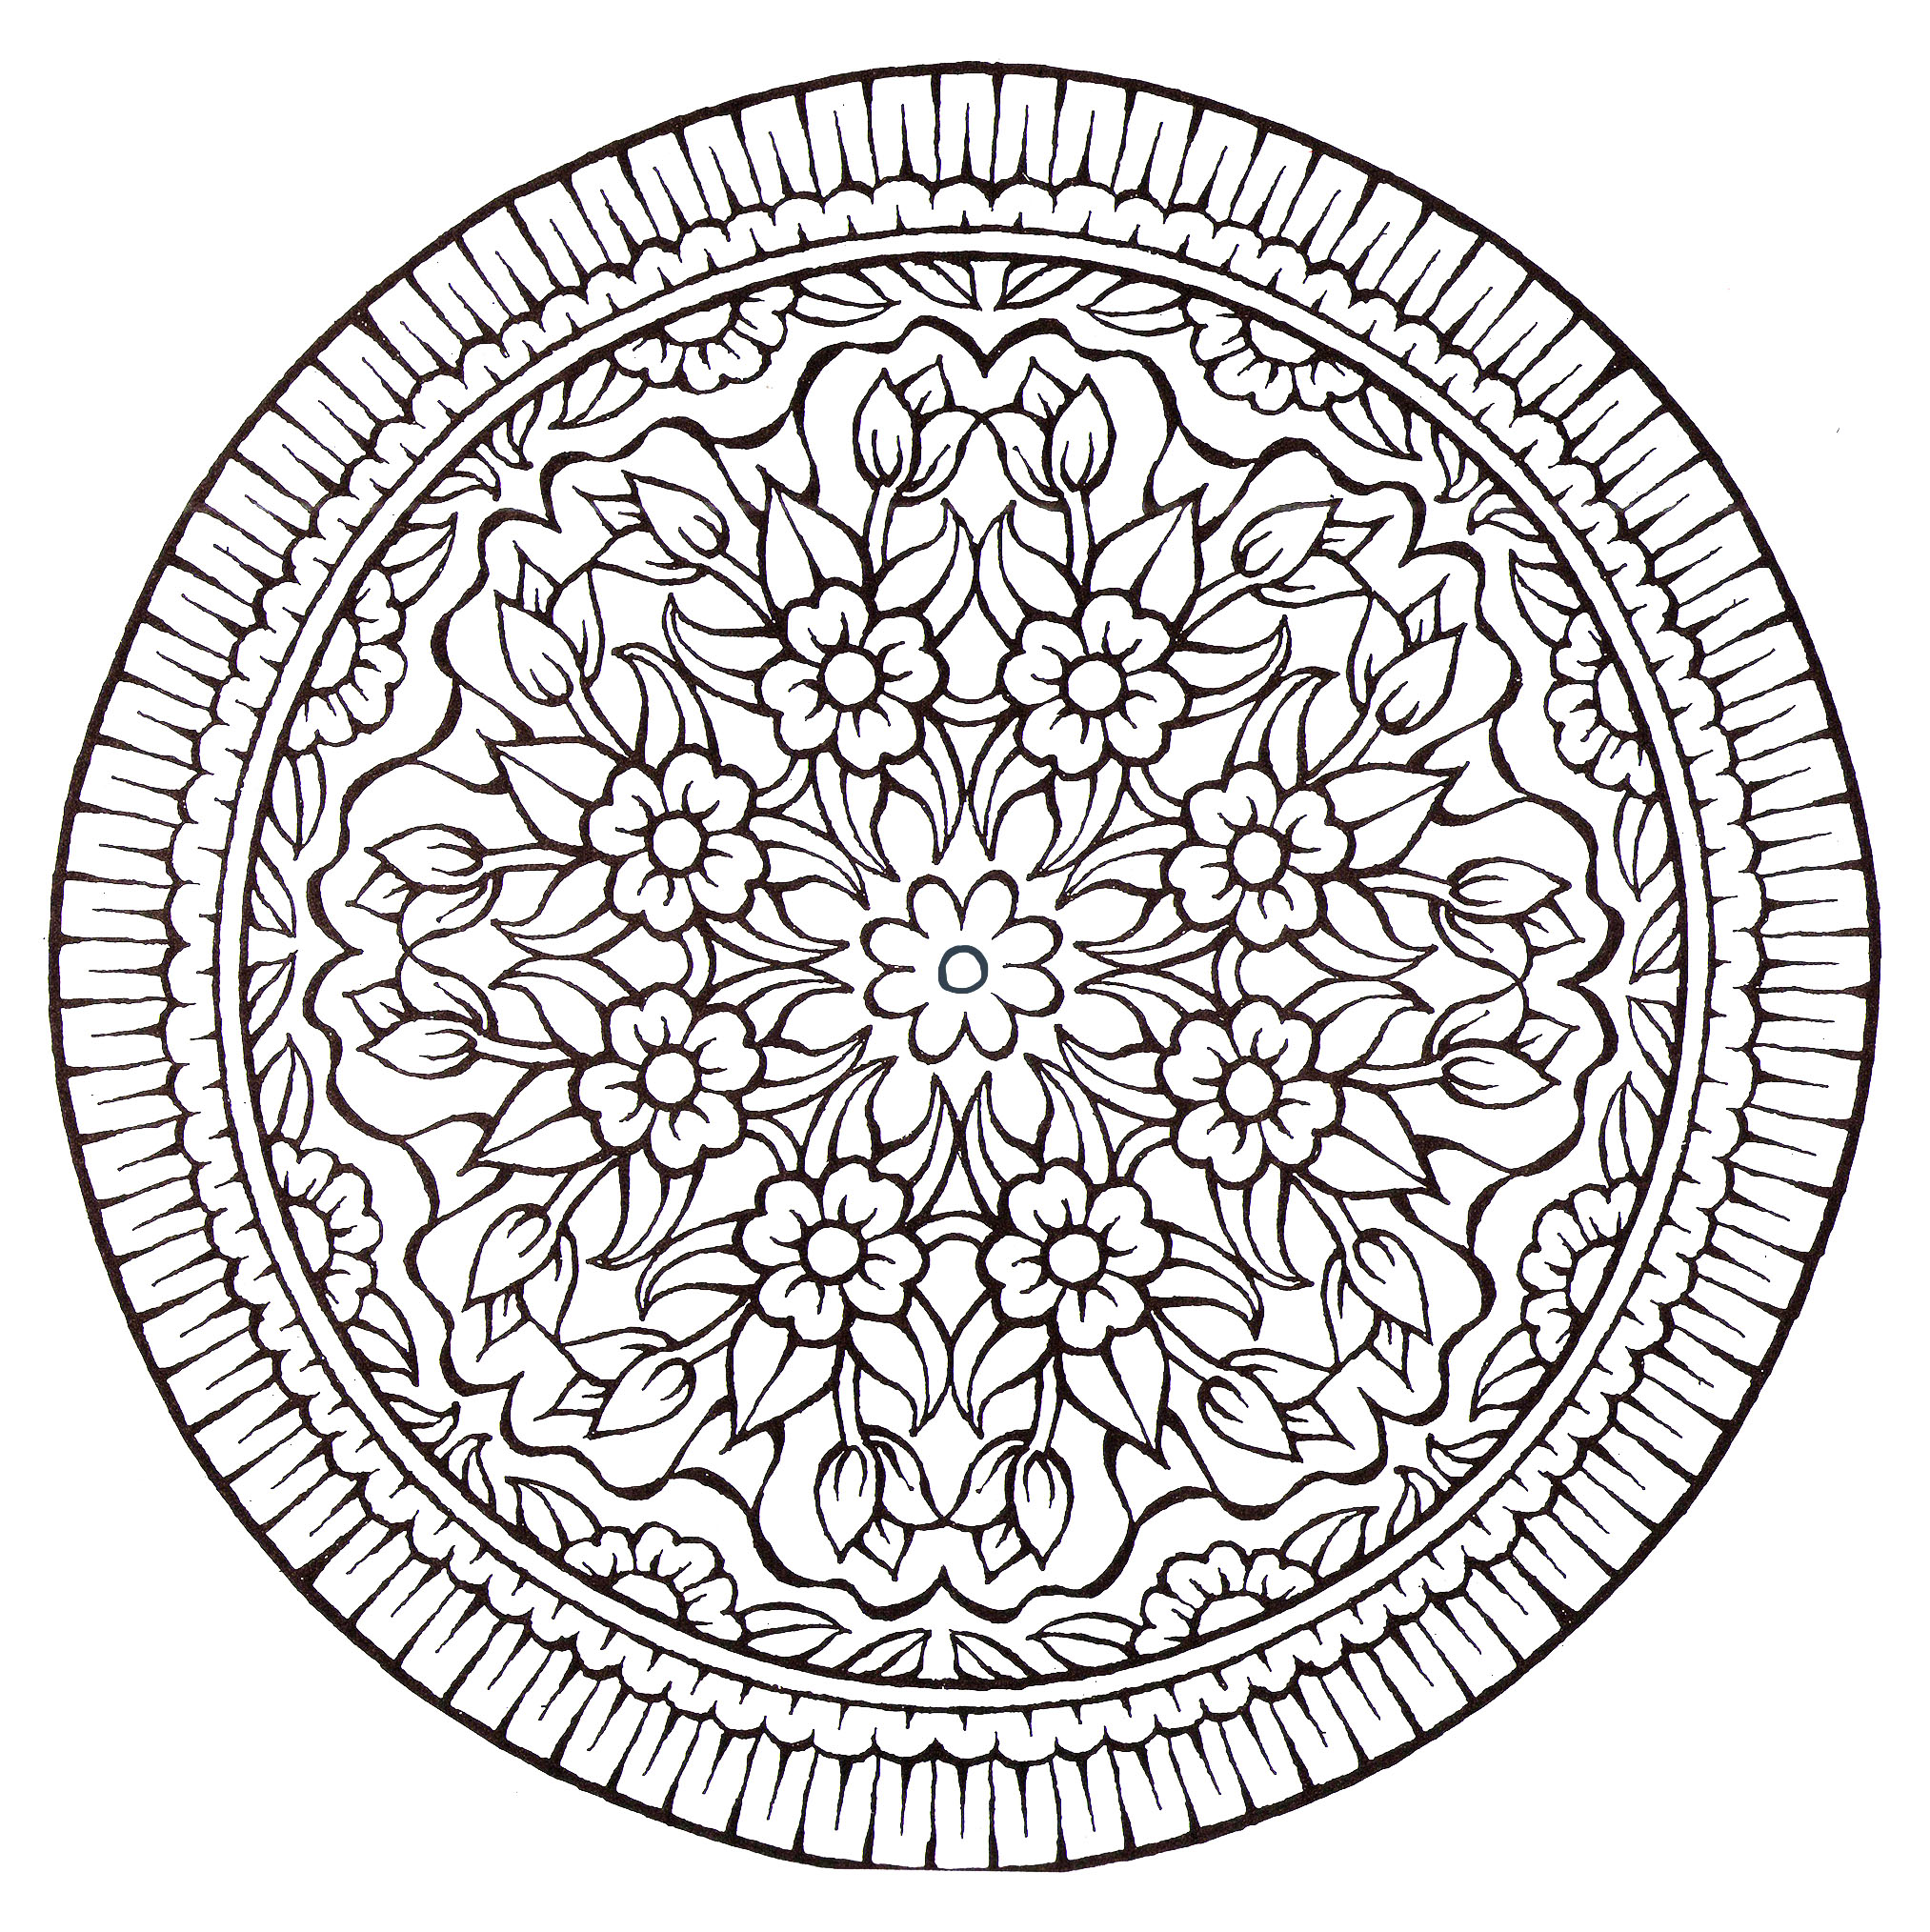 Prepare your pens and pencils to color this Mandala full of small details and intricate areas. Feel free to let your instincts decide where to color, and what colors to choose.